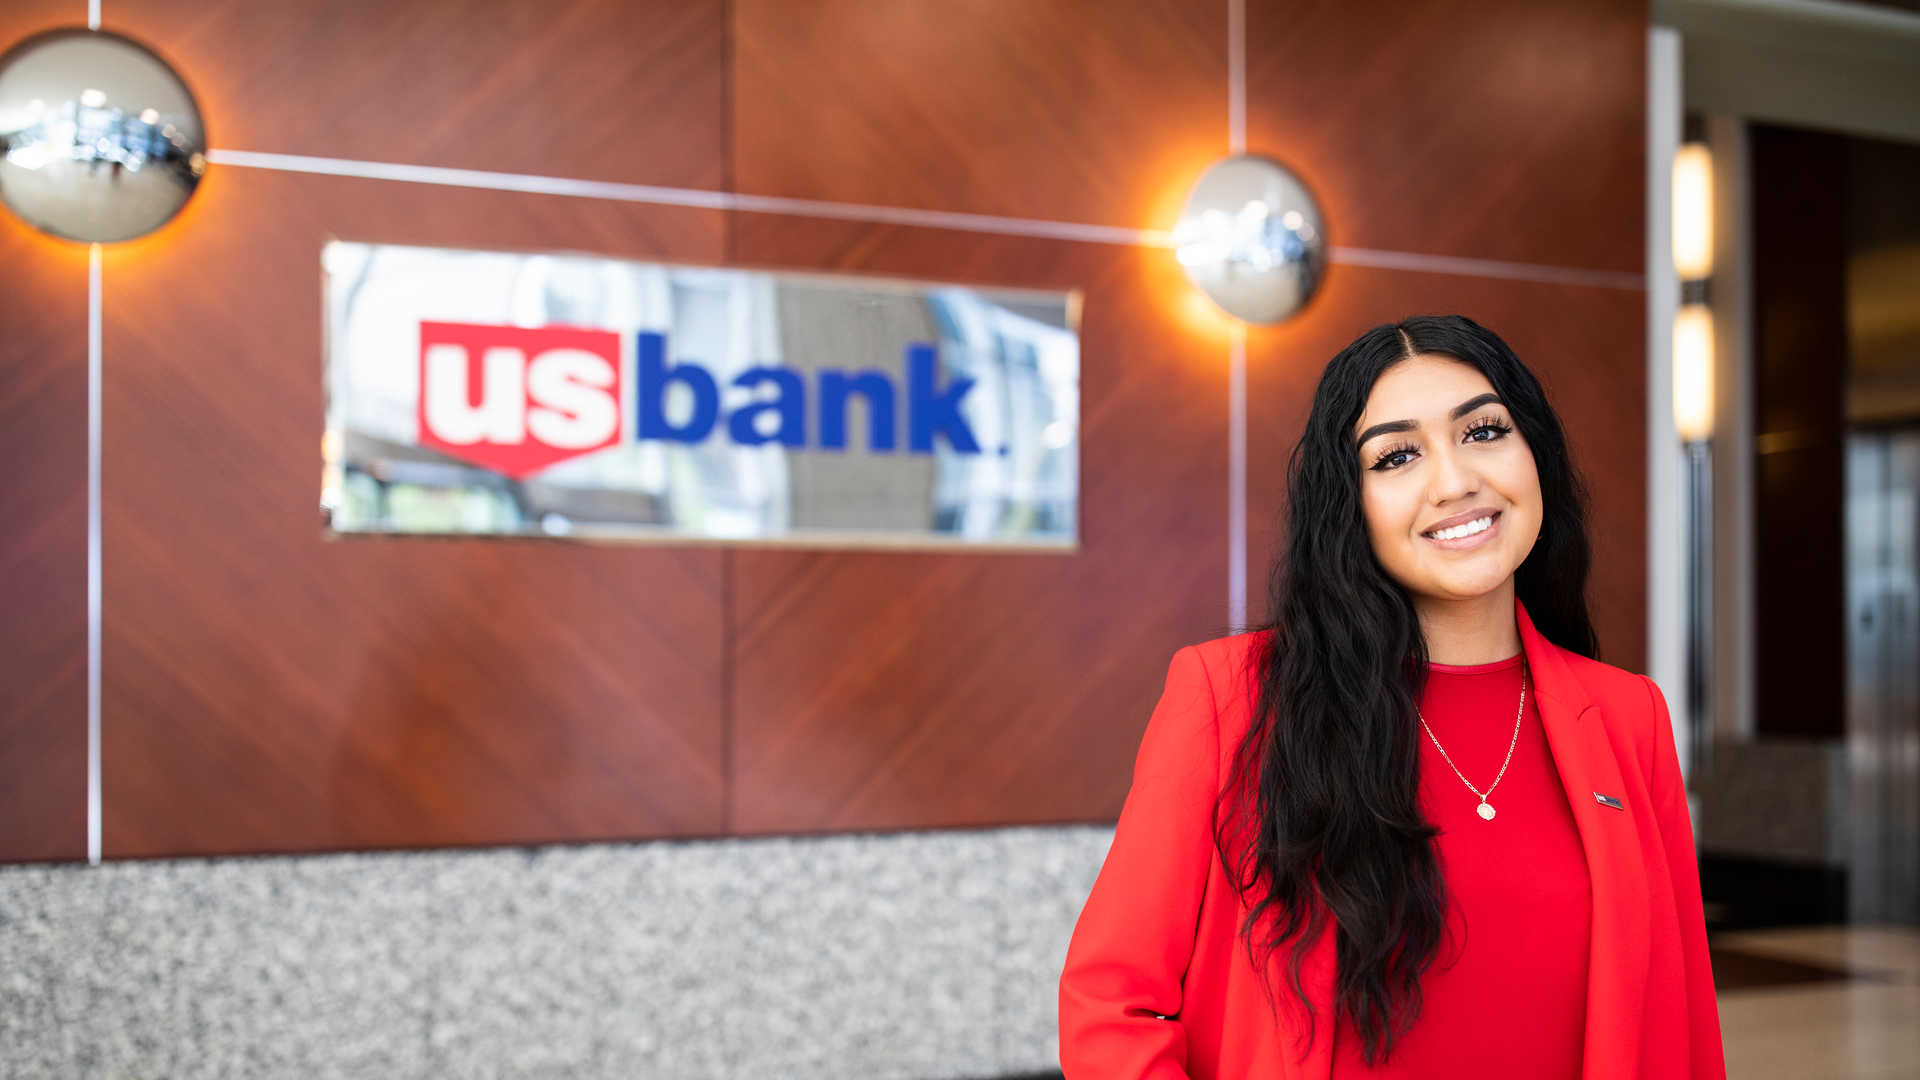 student intern poses in front the US Bank sign